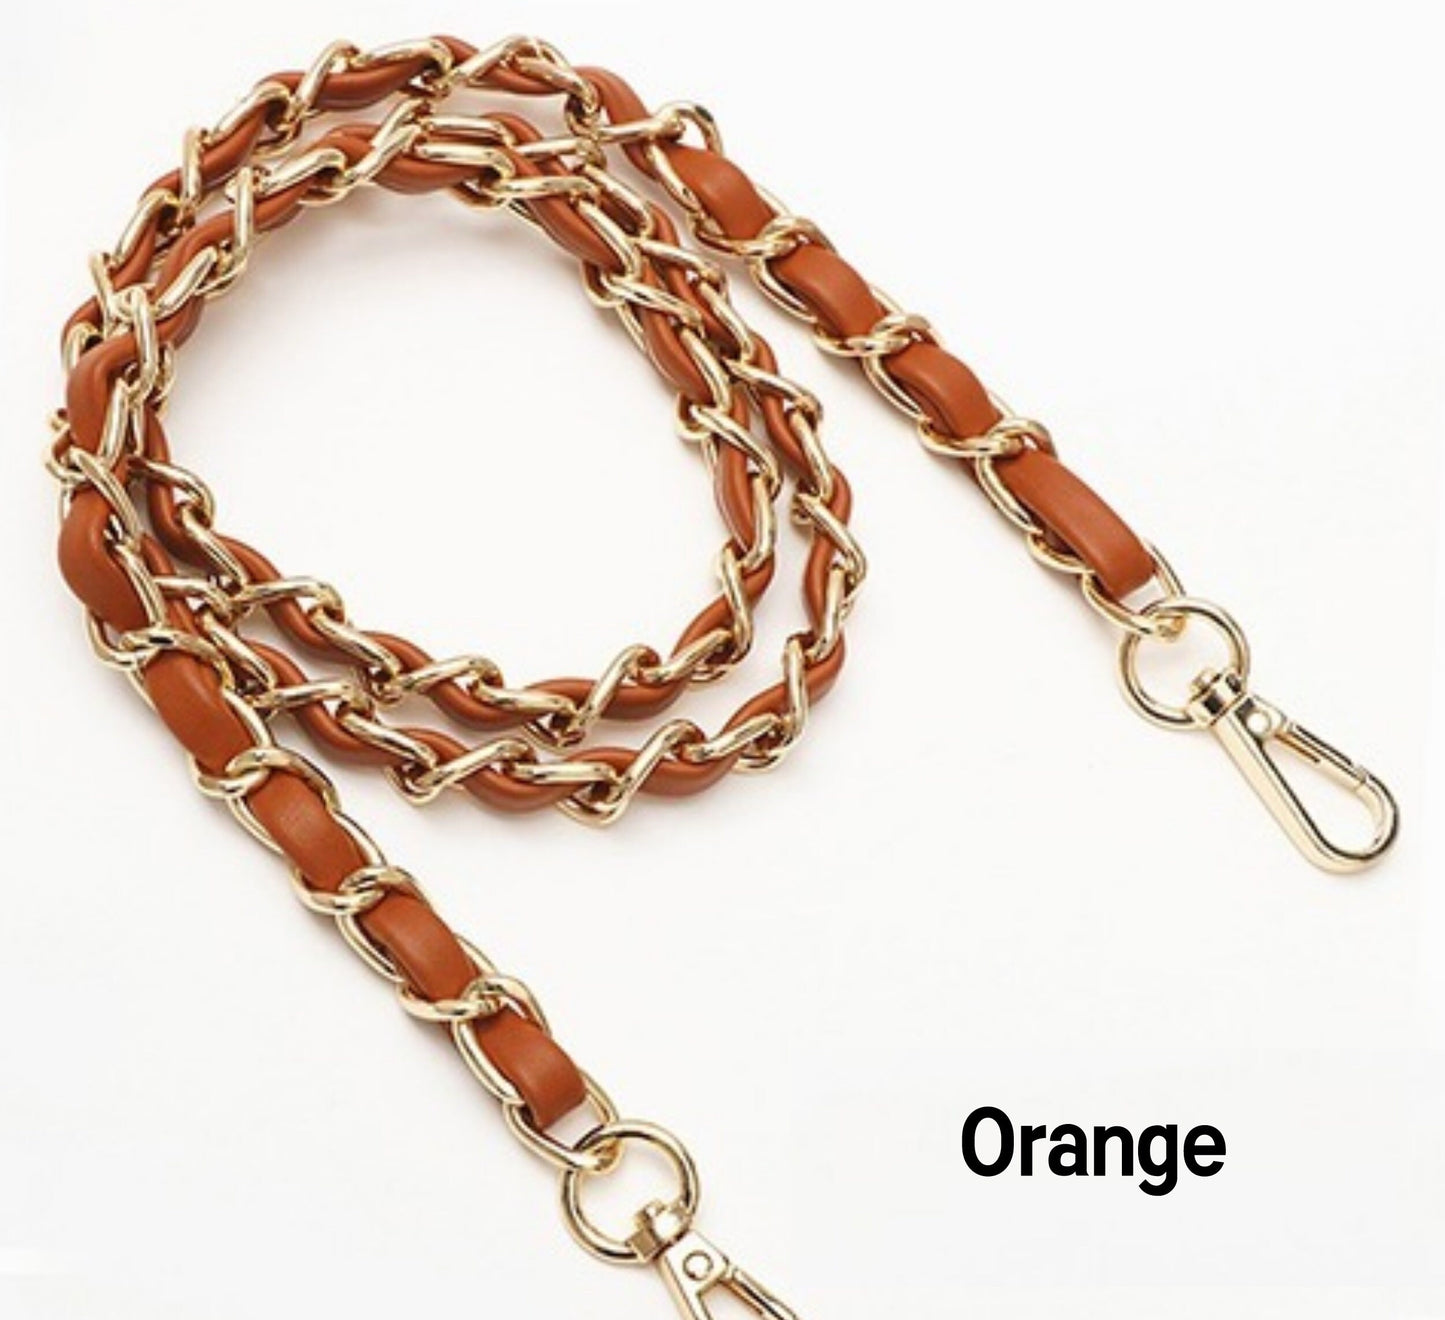 90/100/110/120cm Crossbody Shoulder Strap Leather Chain Replacement | Chane Strap Chain | Marmont Bag Strap | Chain Leather Strap